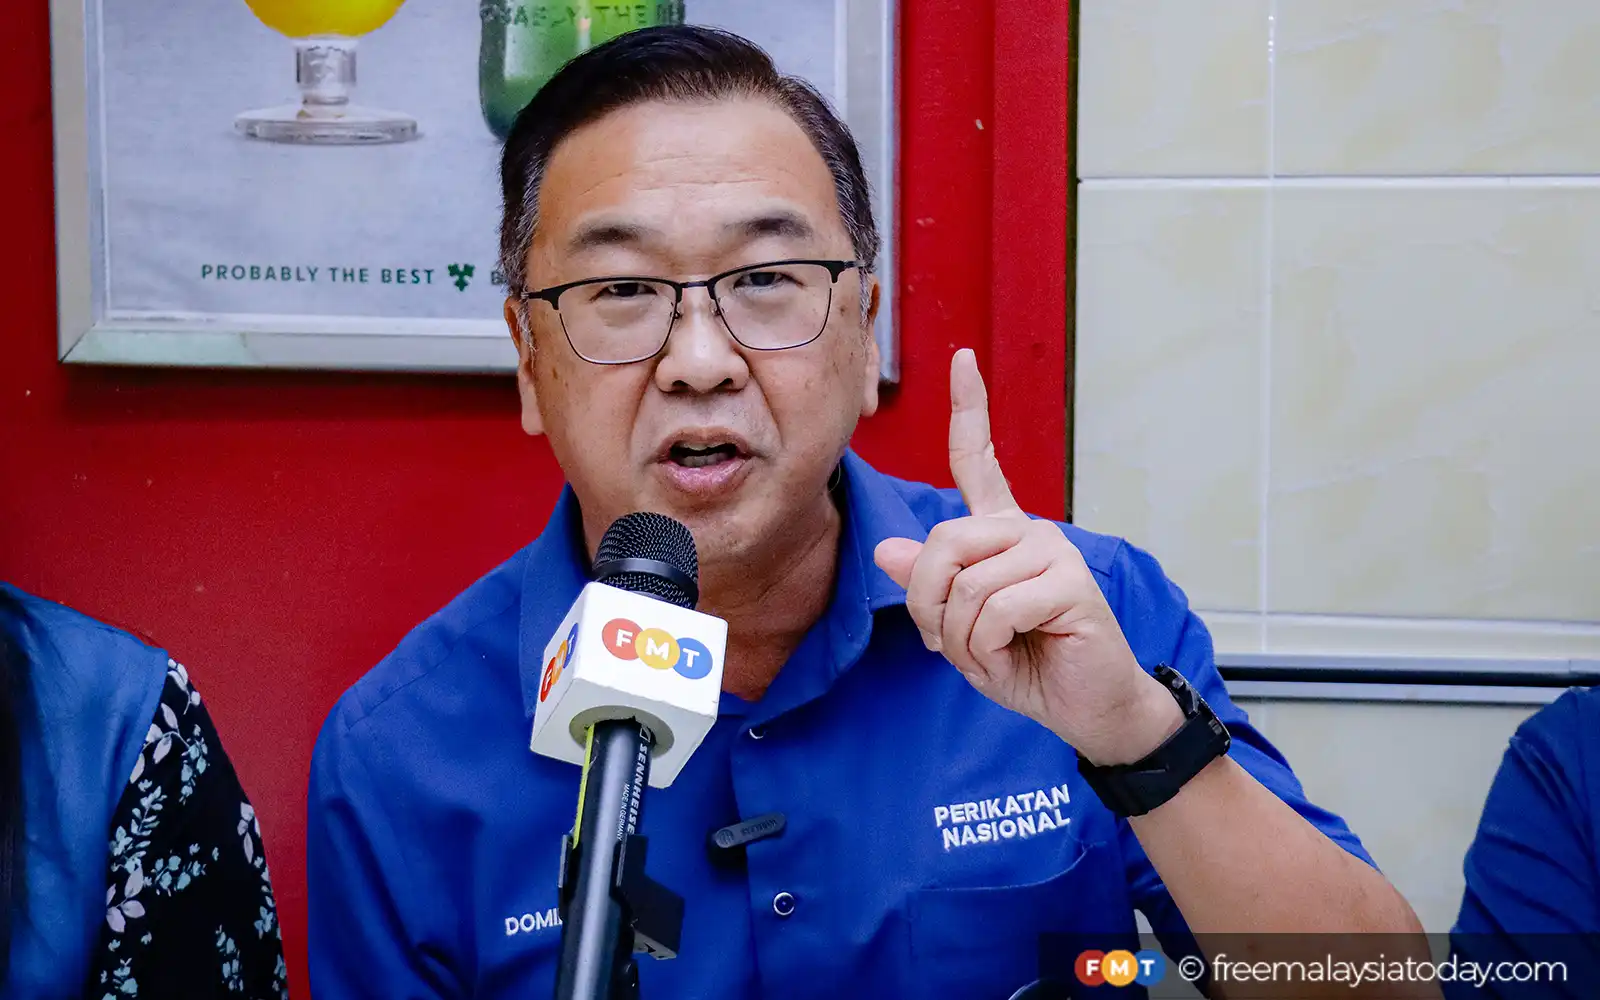 pn can get up to 5% of chinese votes in kkb polls, says lau